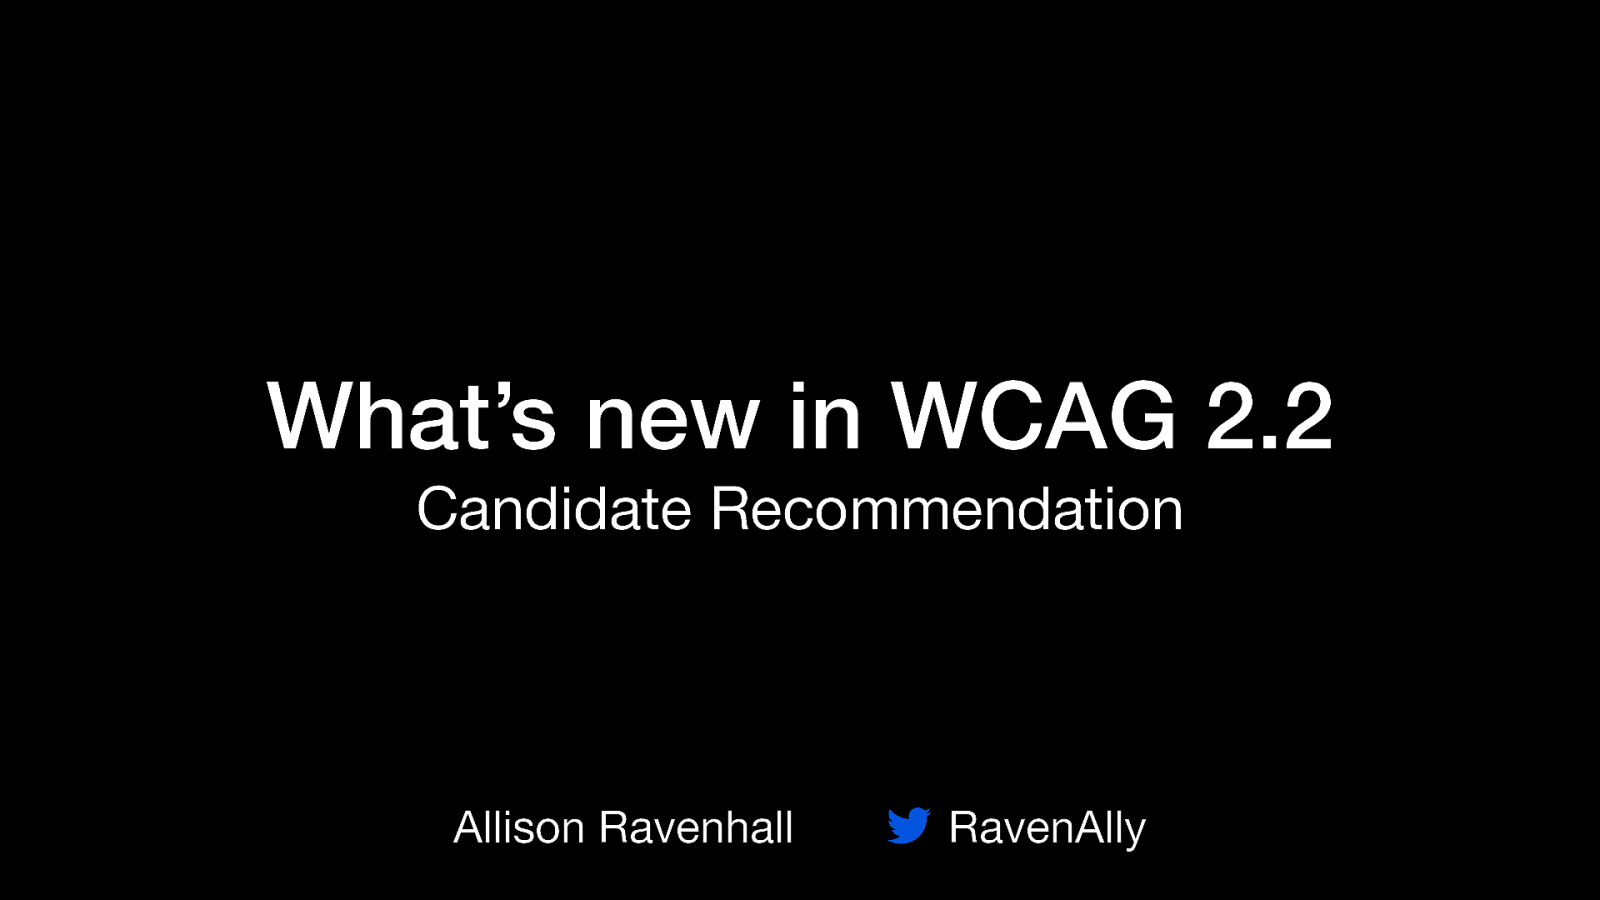 What’s new in WCAG 2.2 Candidate Recommendation